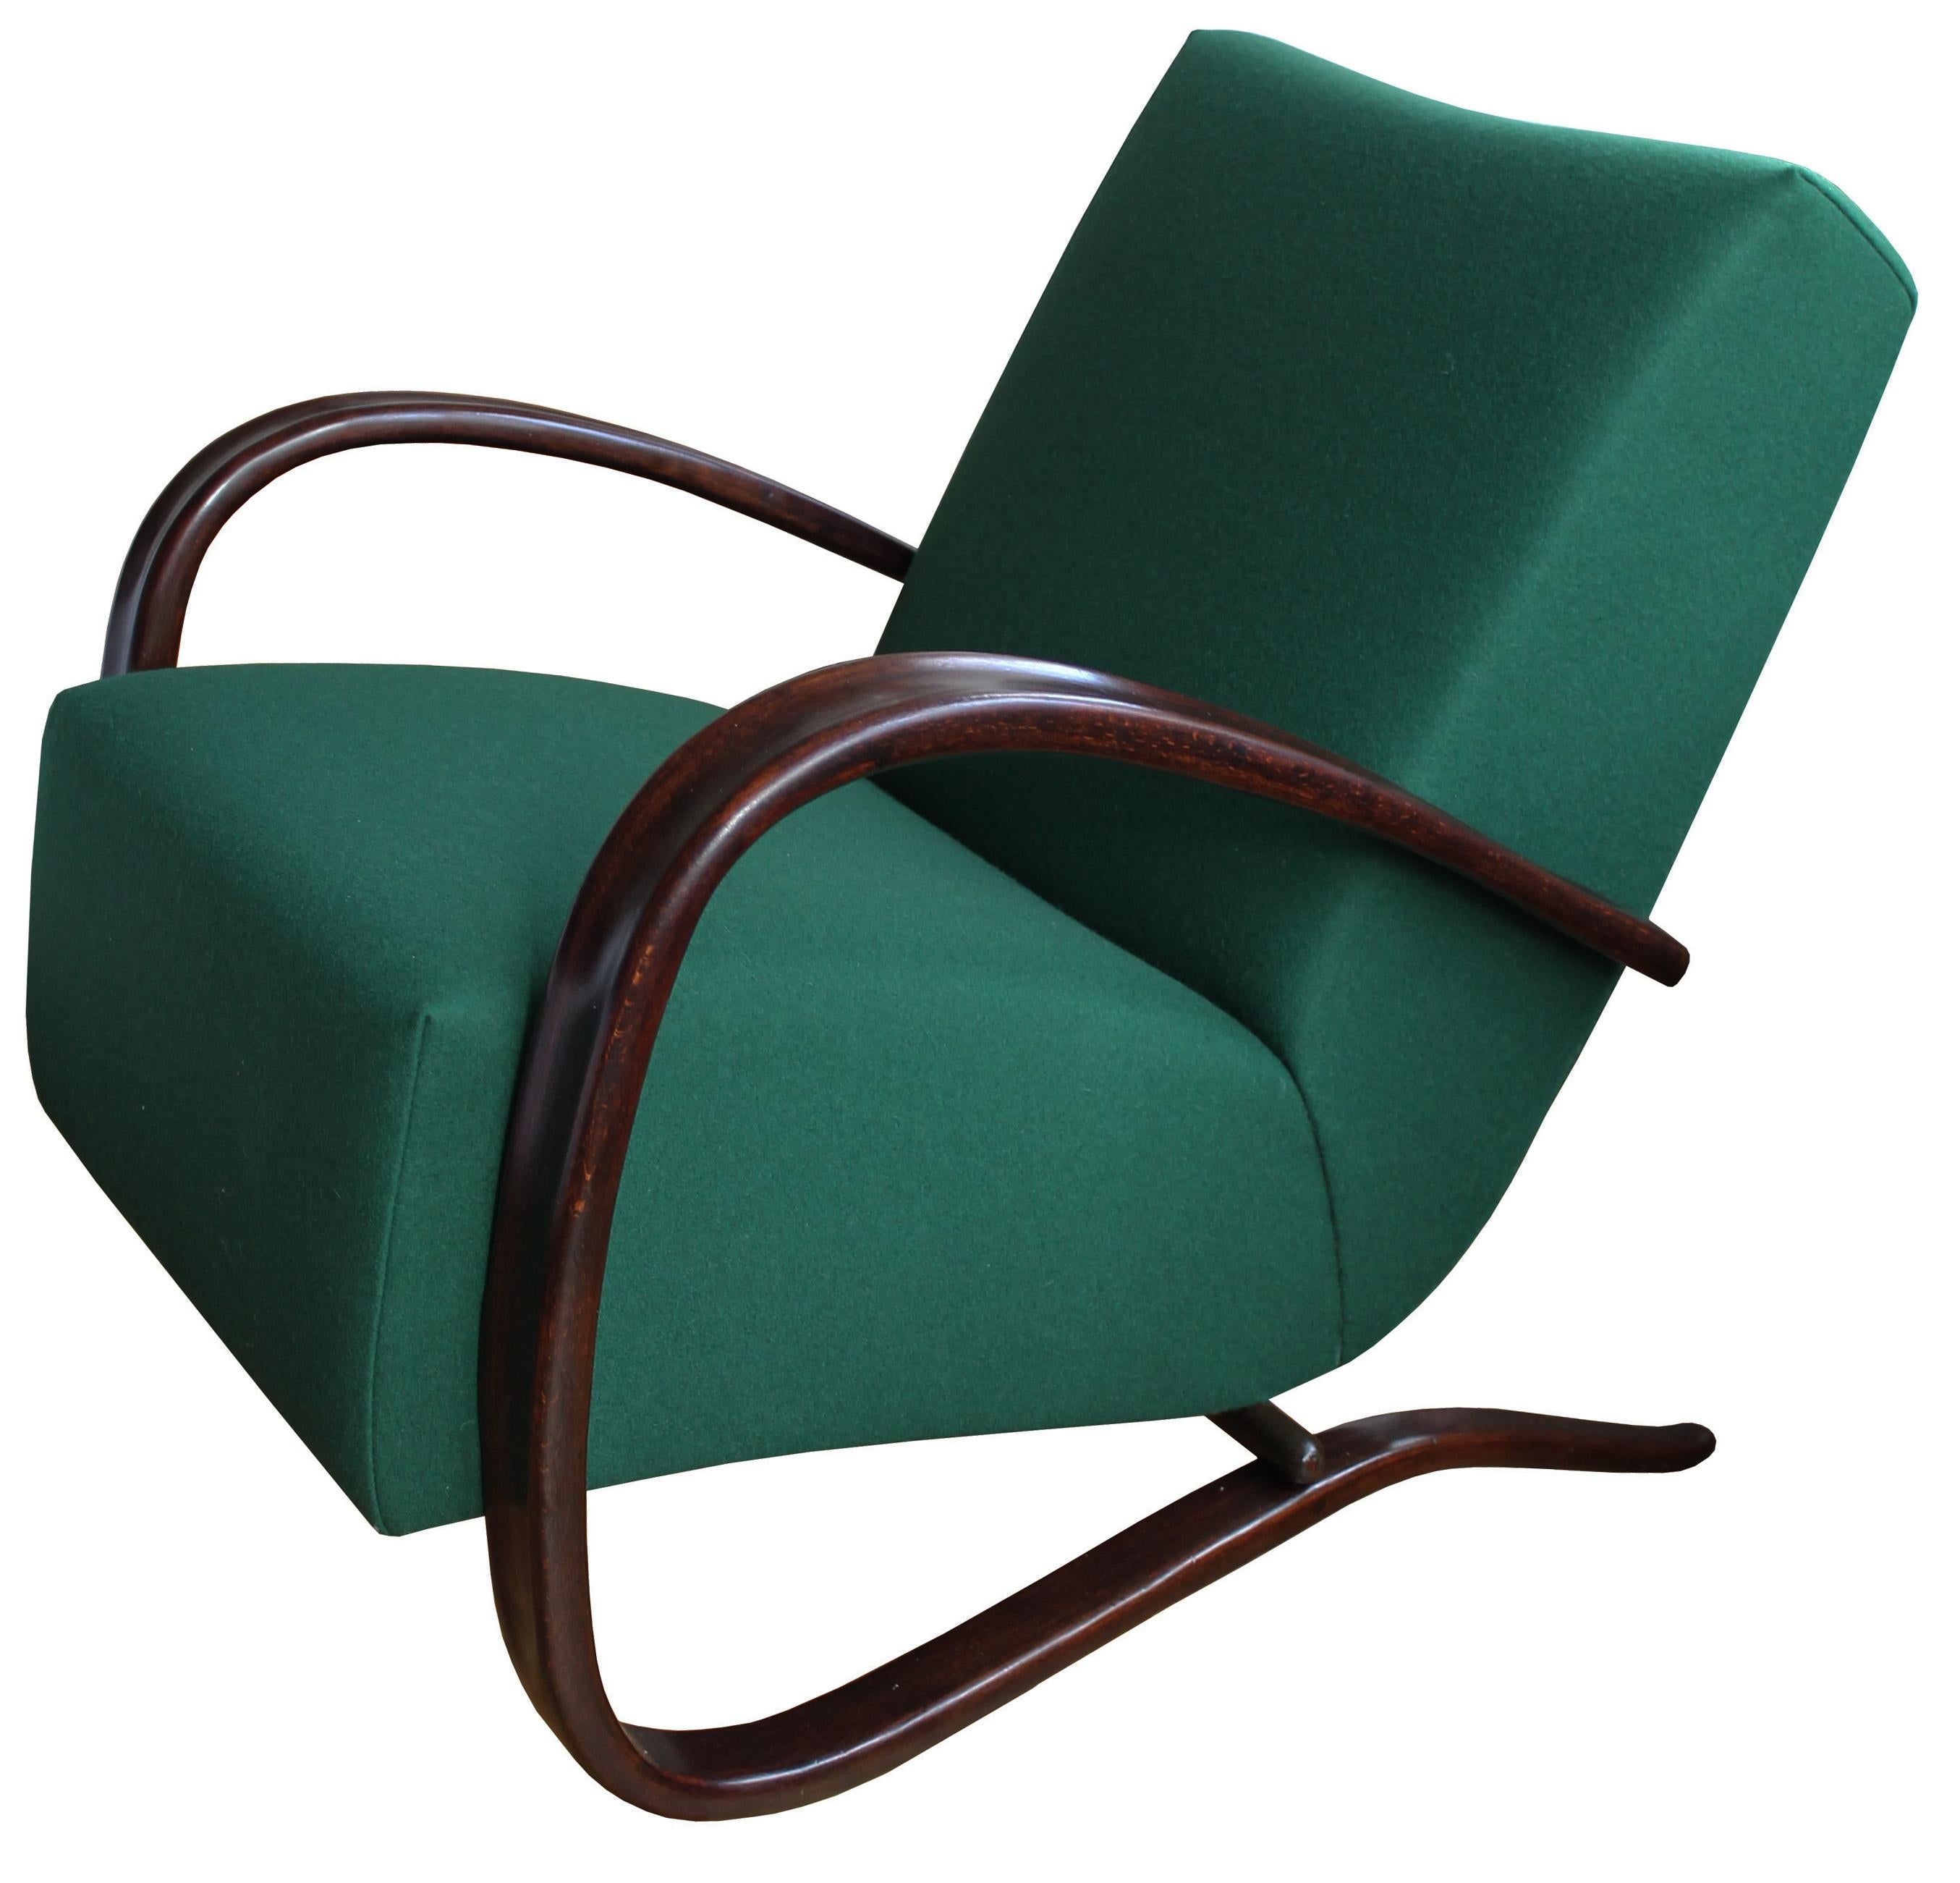 Mid-20th Century 1930s Czech H269 Art Deco Armchair by Jindrich Halabala for UP Brno